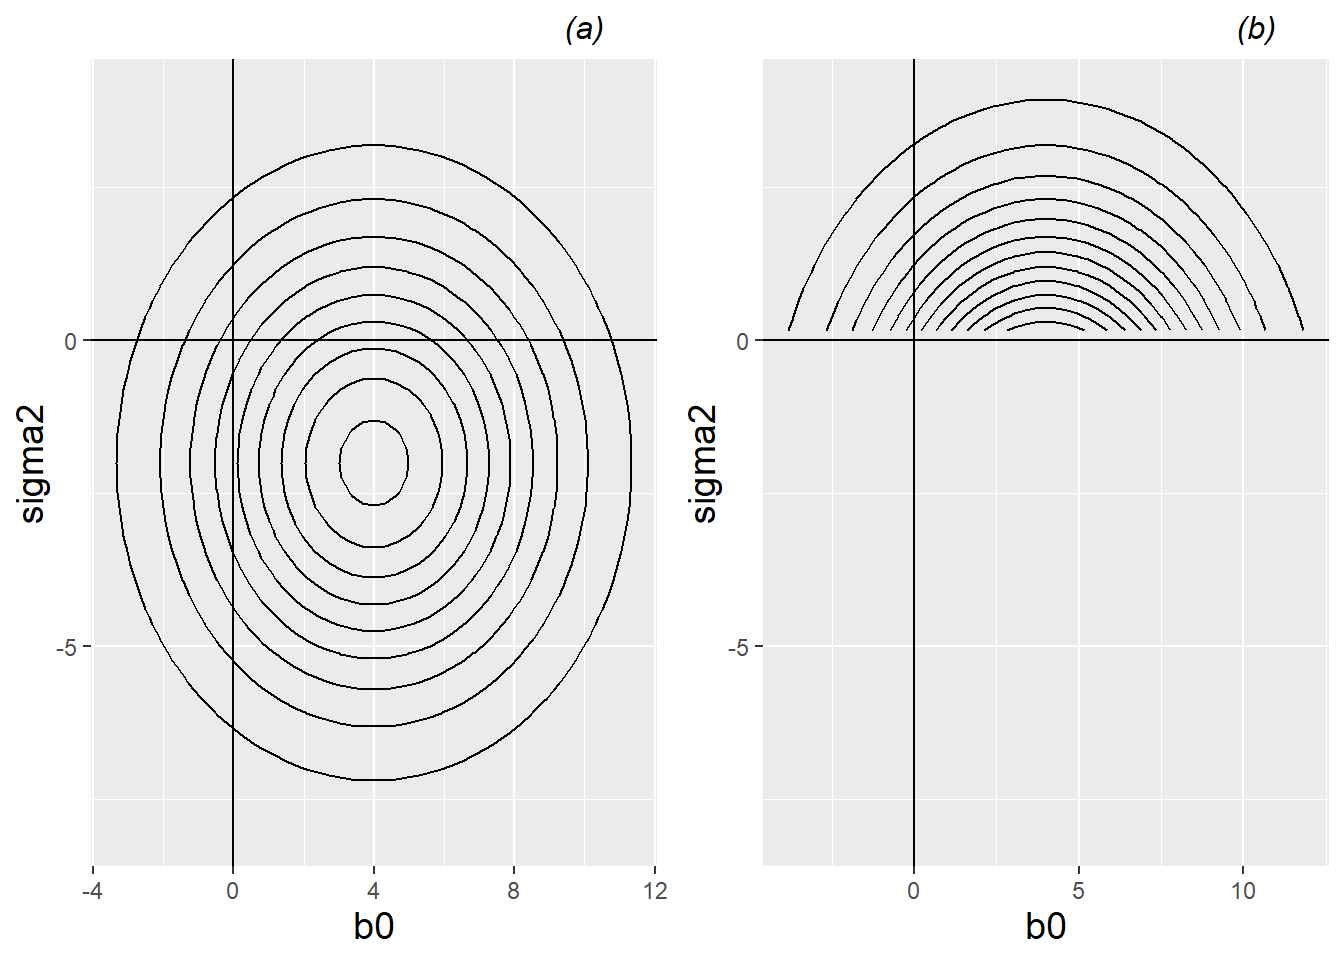 Left (a): hypothetical contours of the likelihood function \(L(\beta_0, \sigma^2)\) with no restrictions on \(\sigma^2\); the likelihood function is maximized at \((\hat{\beta}_0, \hat{\sigma}^2)=(4,-2)\). Right (b): hypothetical contours of the likelihood function \(L(\beta_0, \sigma^2)\) with the restriction that \(\sigma^2 \geq 0\); the constrained likelihood function is maximized at \((\hat{\beta}_0, \hat{\sigma}^2)=(4,0)\).